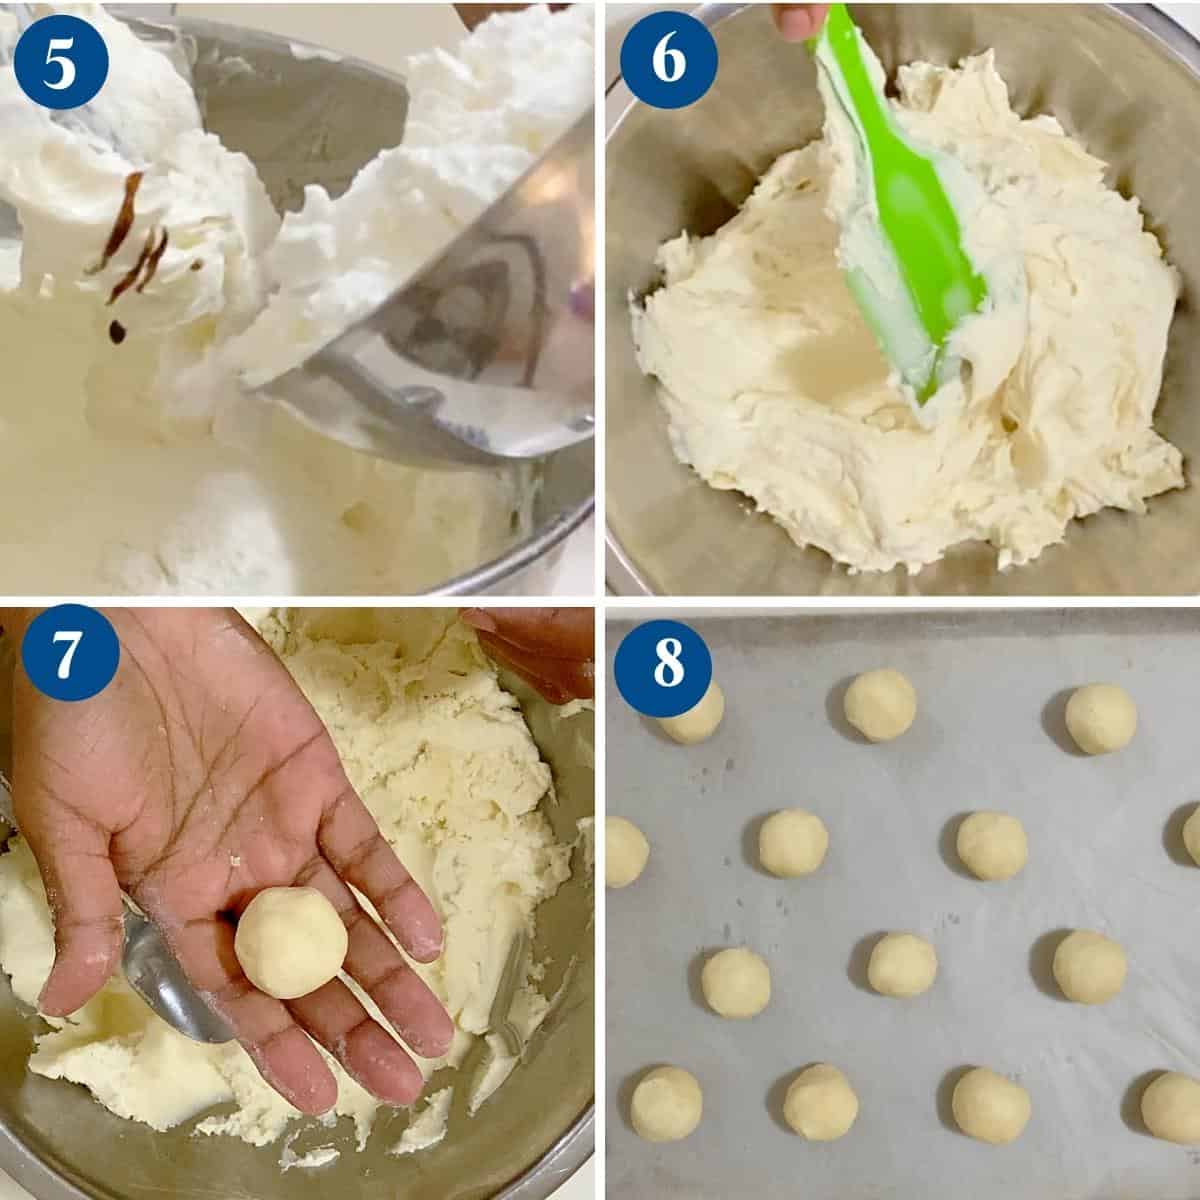 Progress pictures rolling the cookie dough.